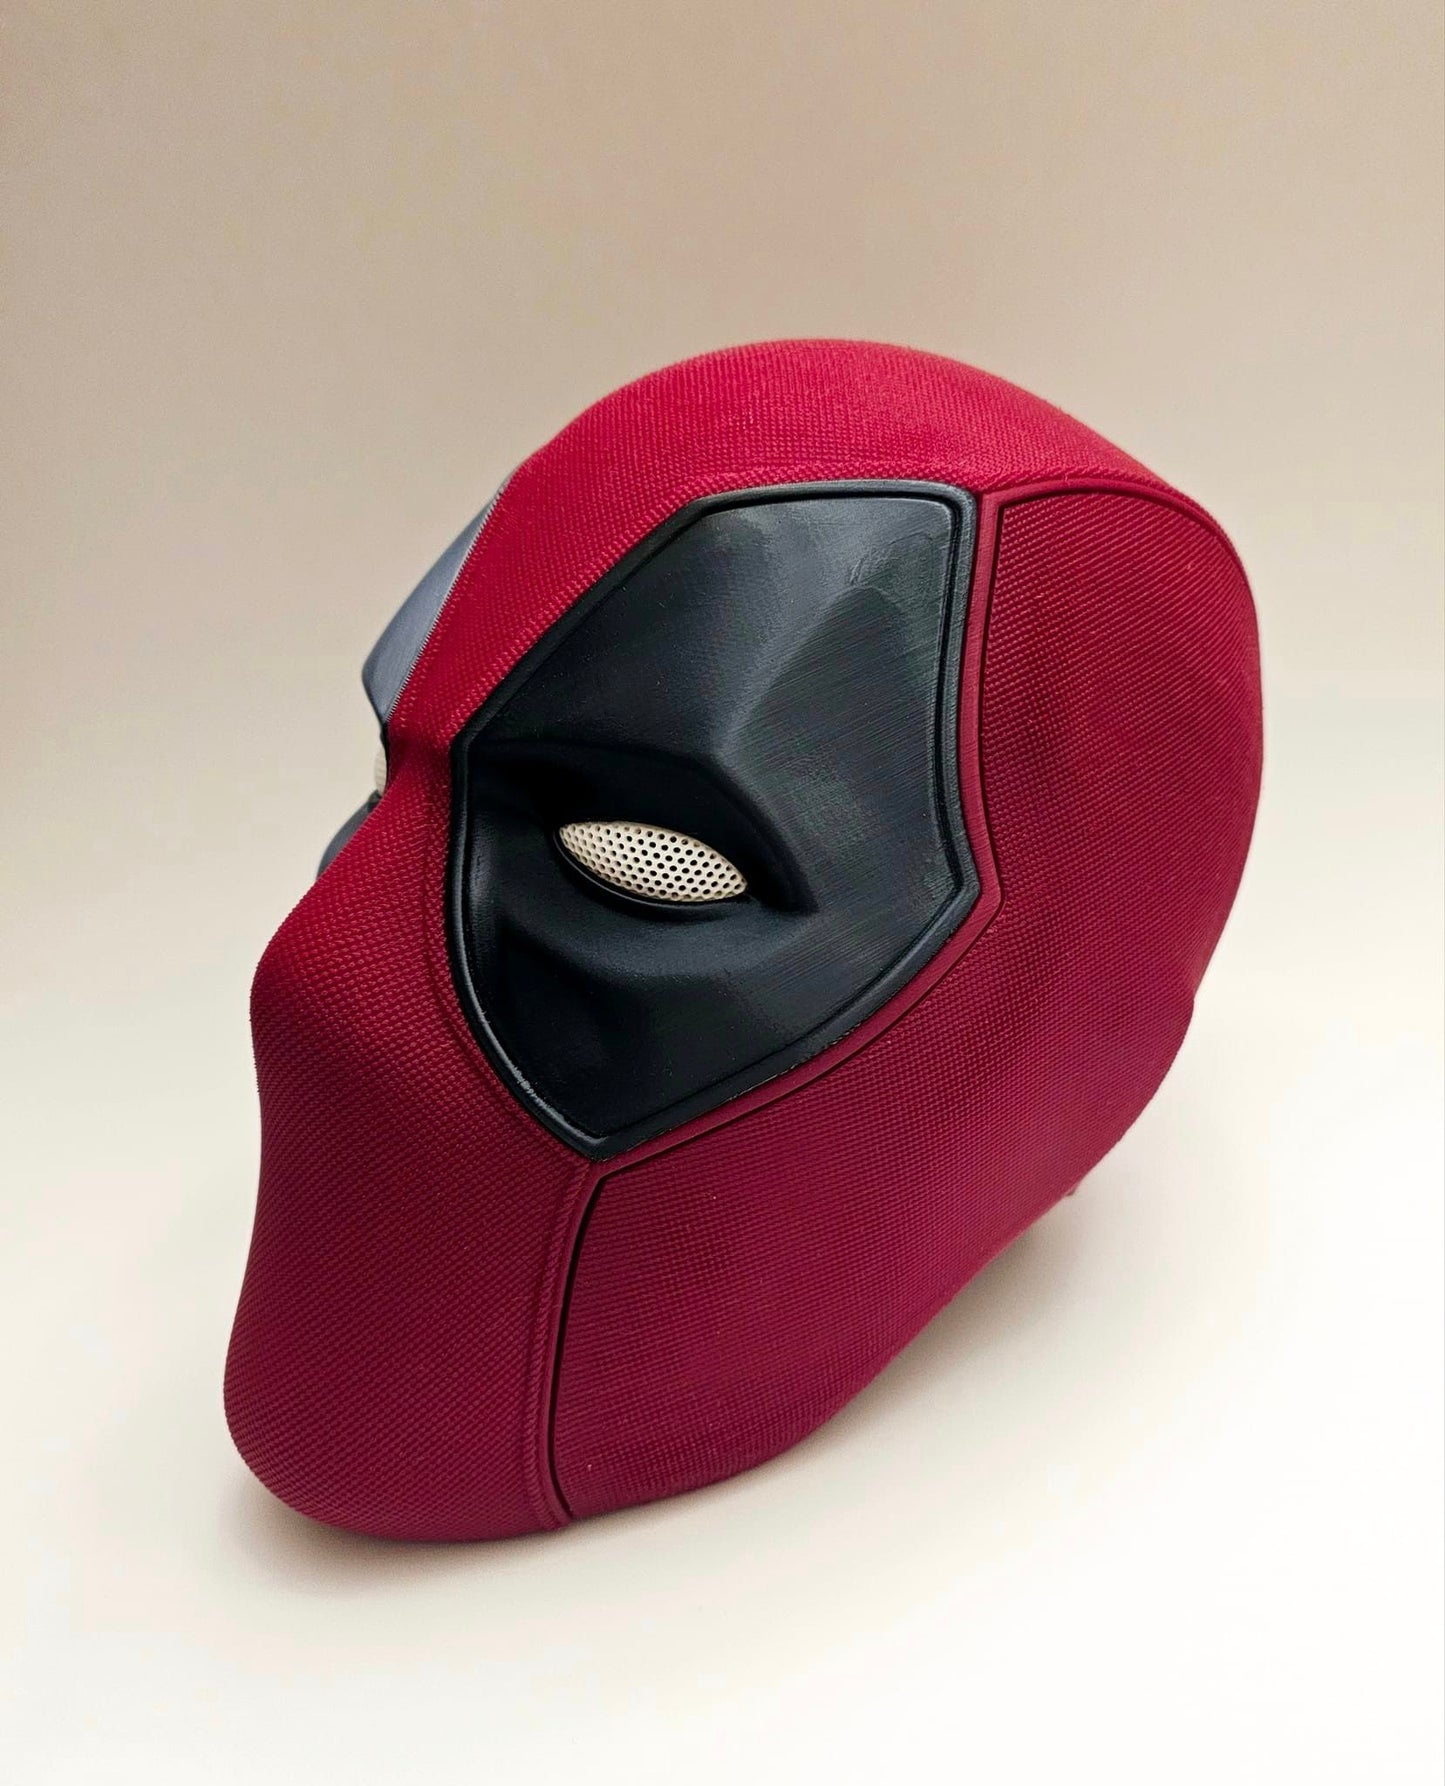 Deadpool Cosplay and Display Mask: Featuring Magnetic Panels and Expressive Eyes